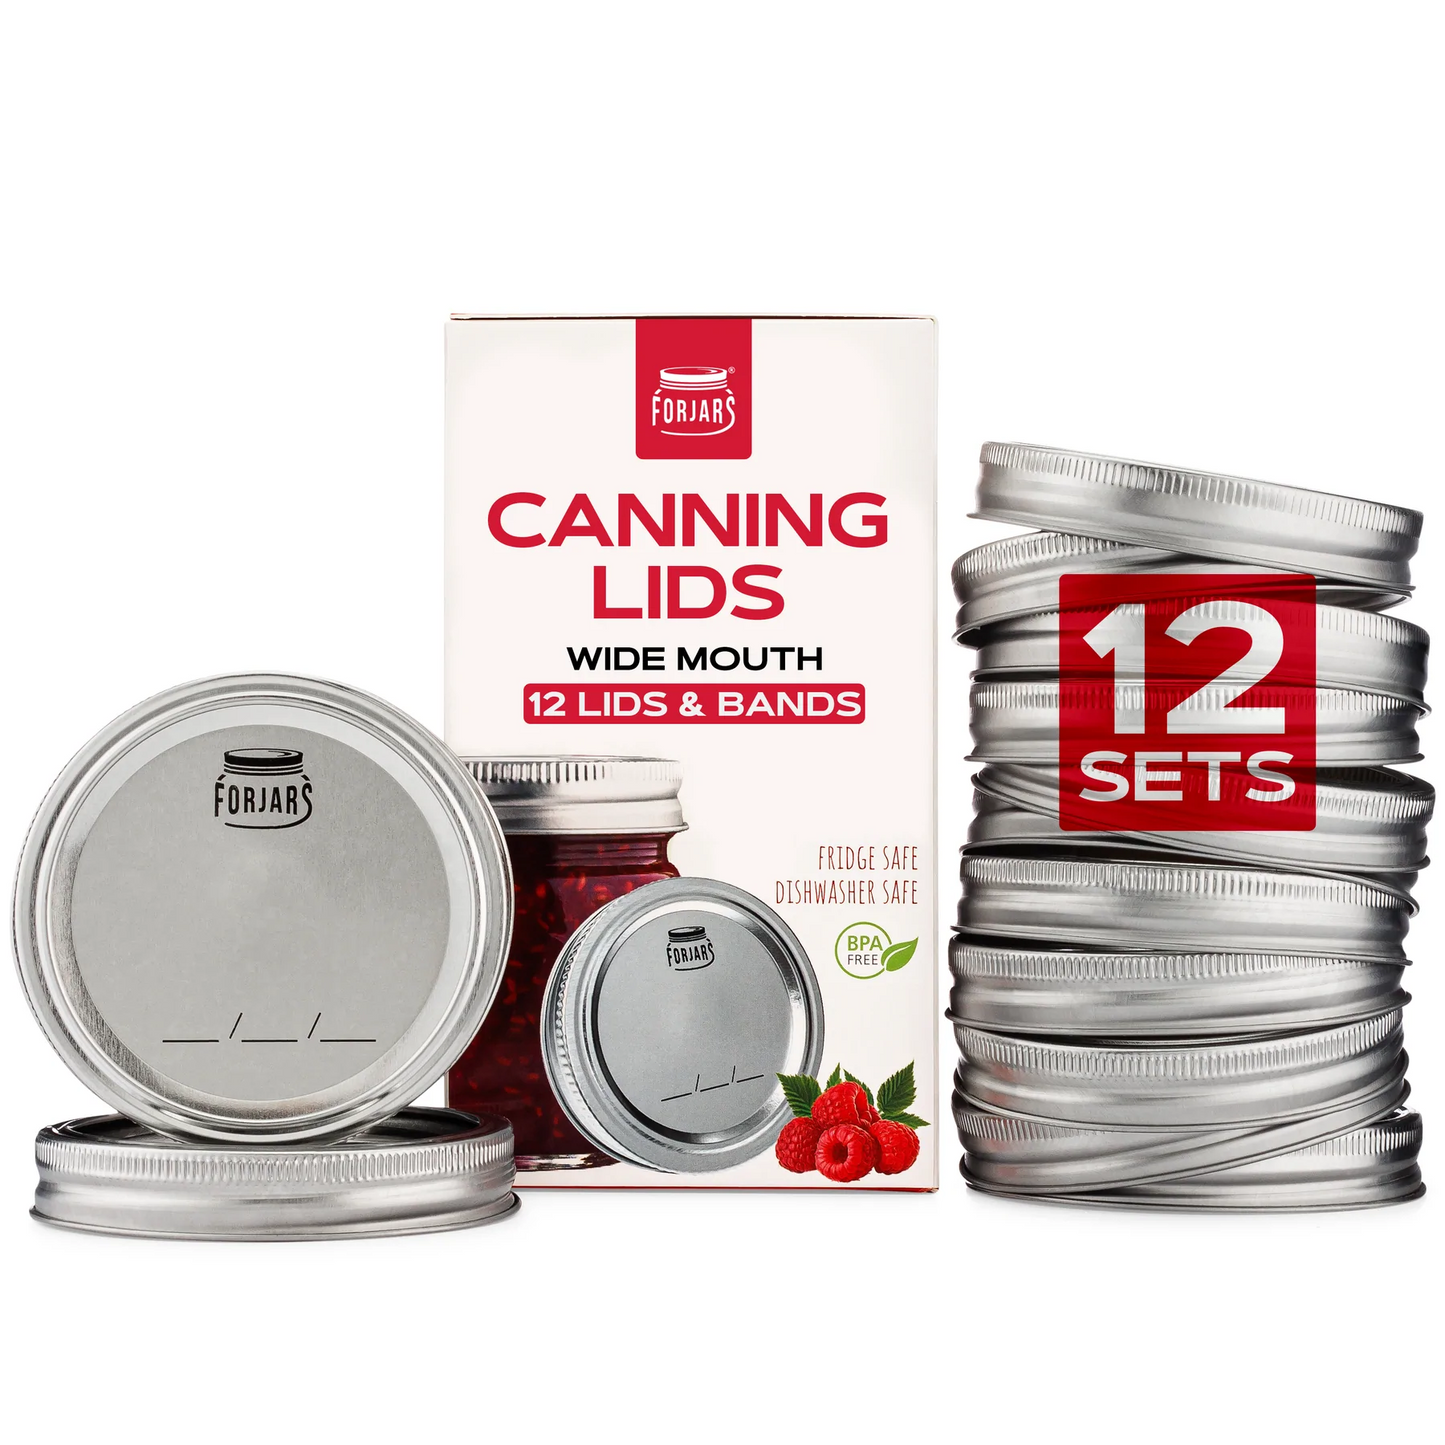 ForJars - 12 Wide Mouth Canning Lids & Bands